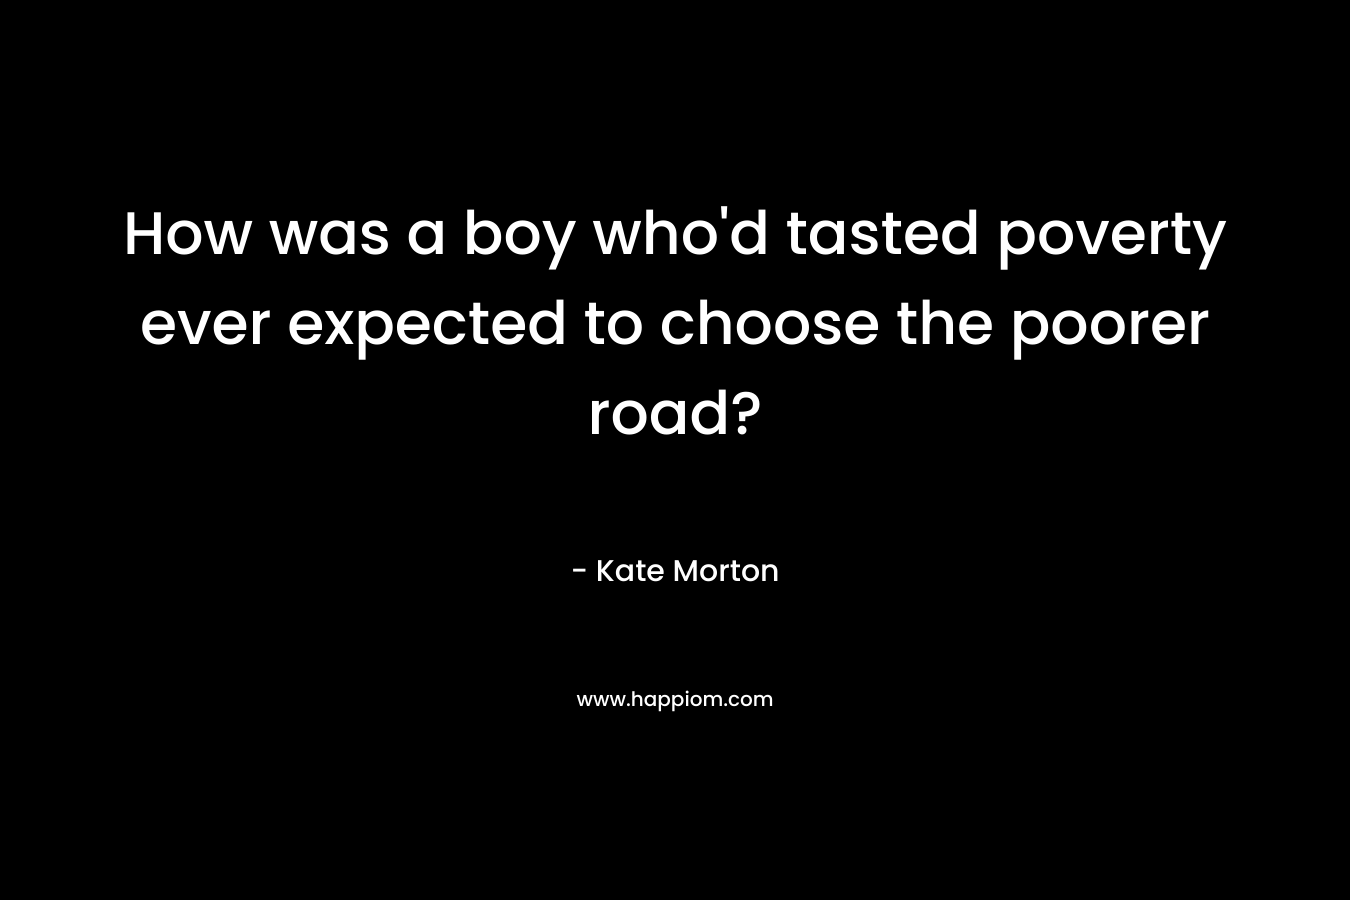 How was a boy who’d tasted poverty ever expected to choose the poorer road? – Kate Morton